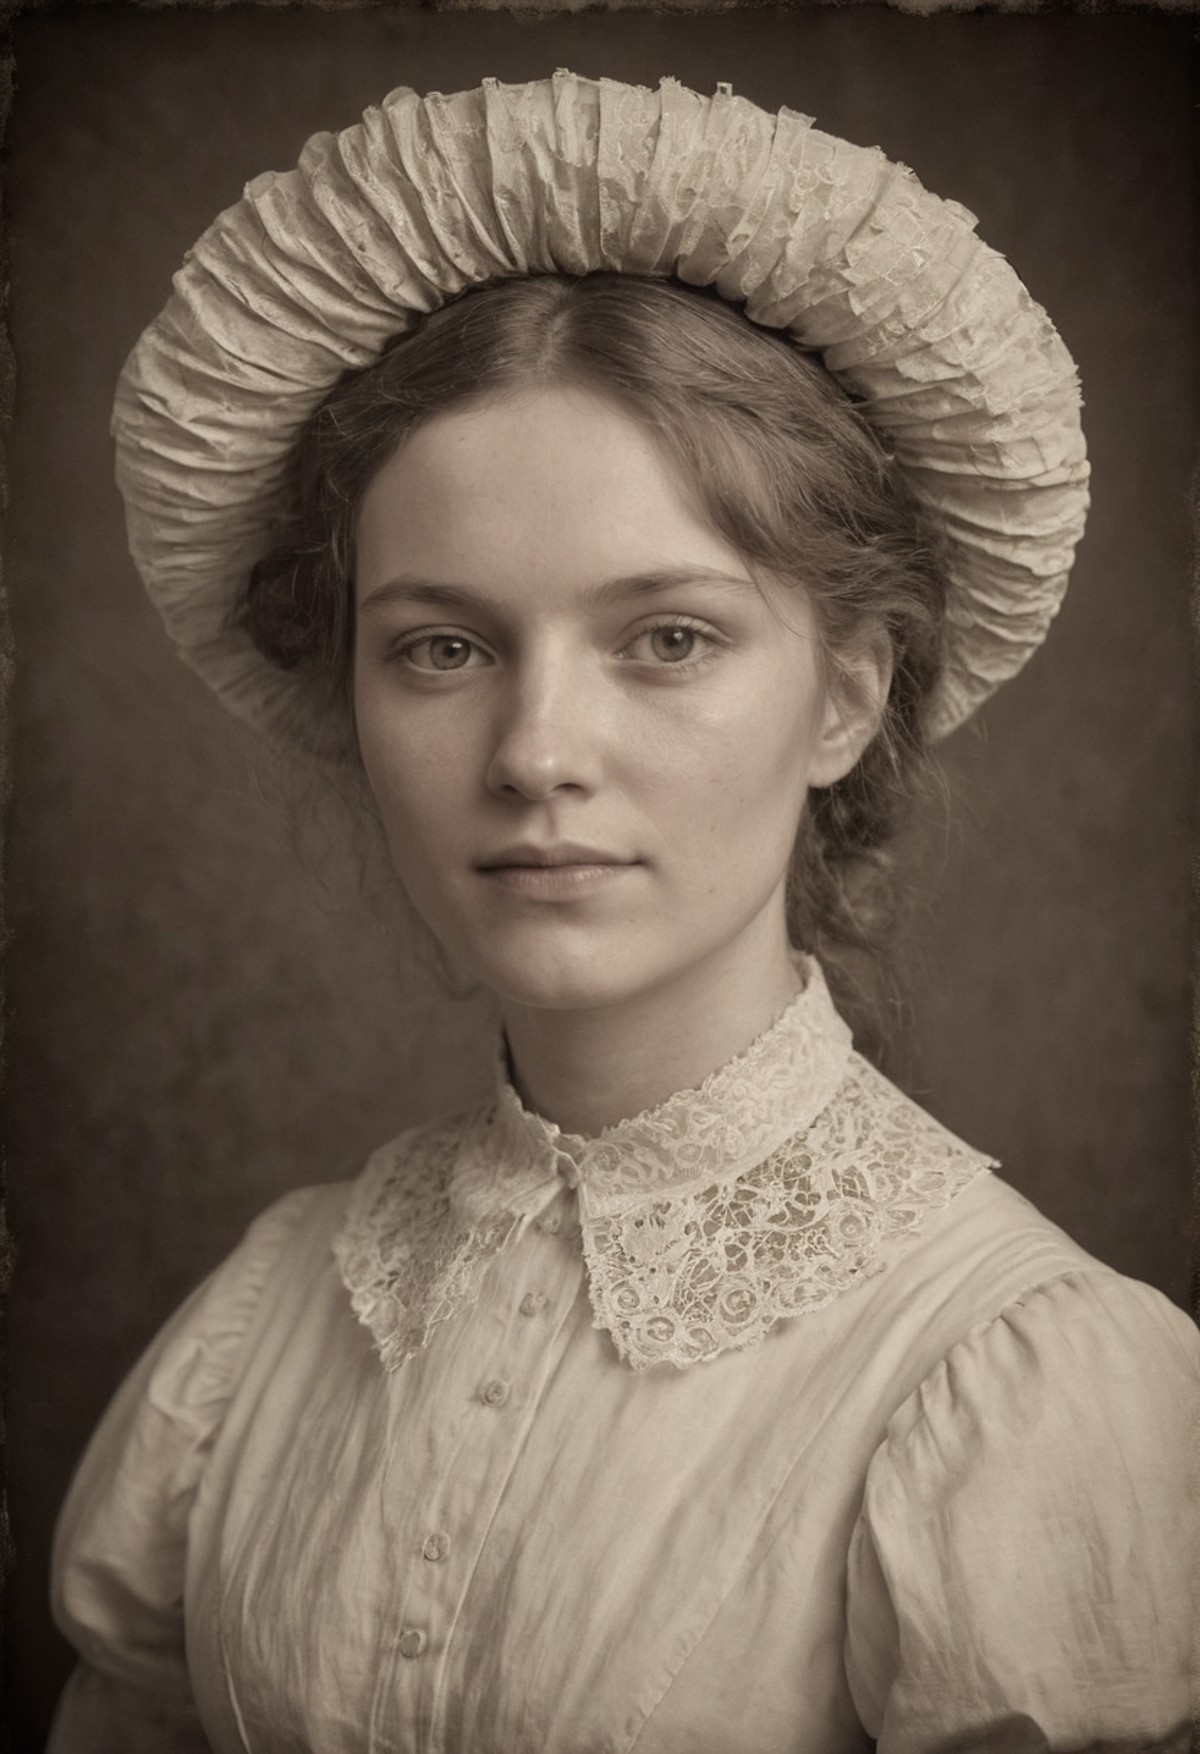 A Victorian-era servant woman poses for a head and shoulder portrait in a photograph style. Sepia tones, 19th-century aest...